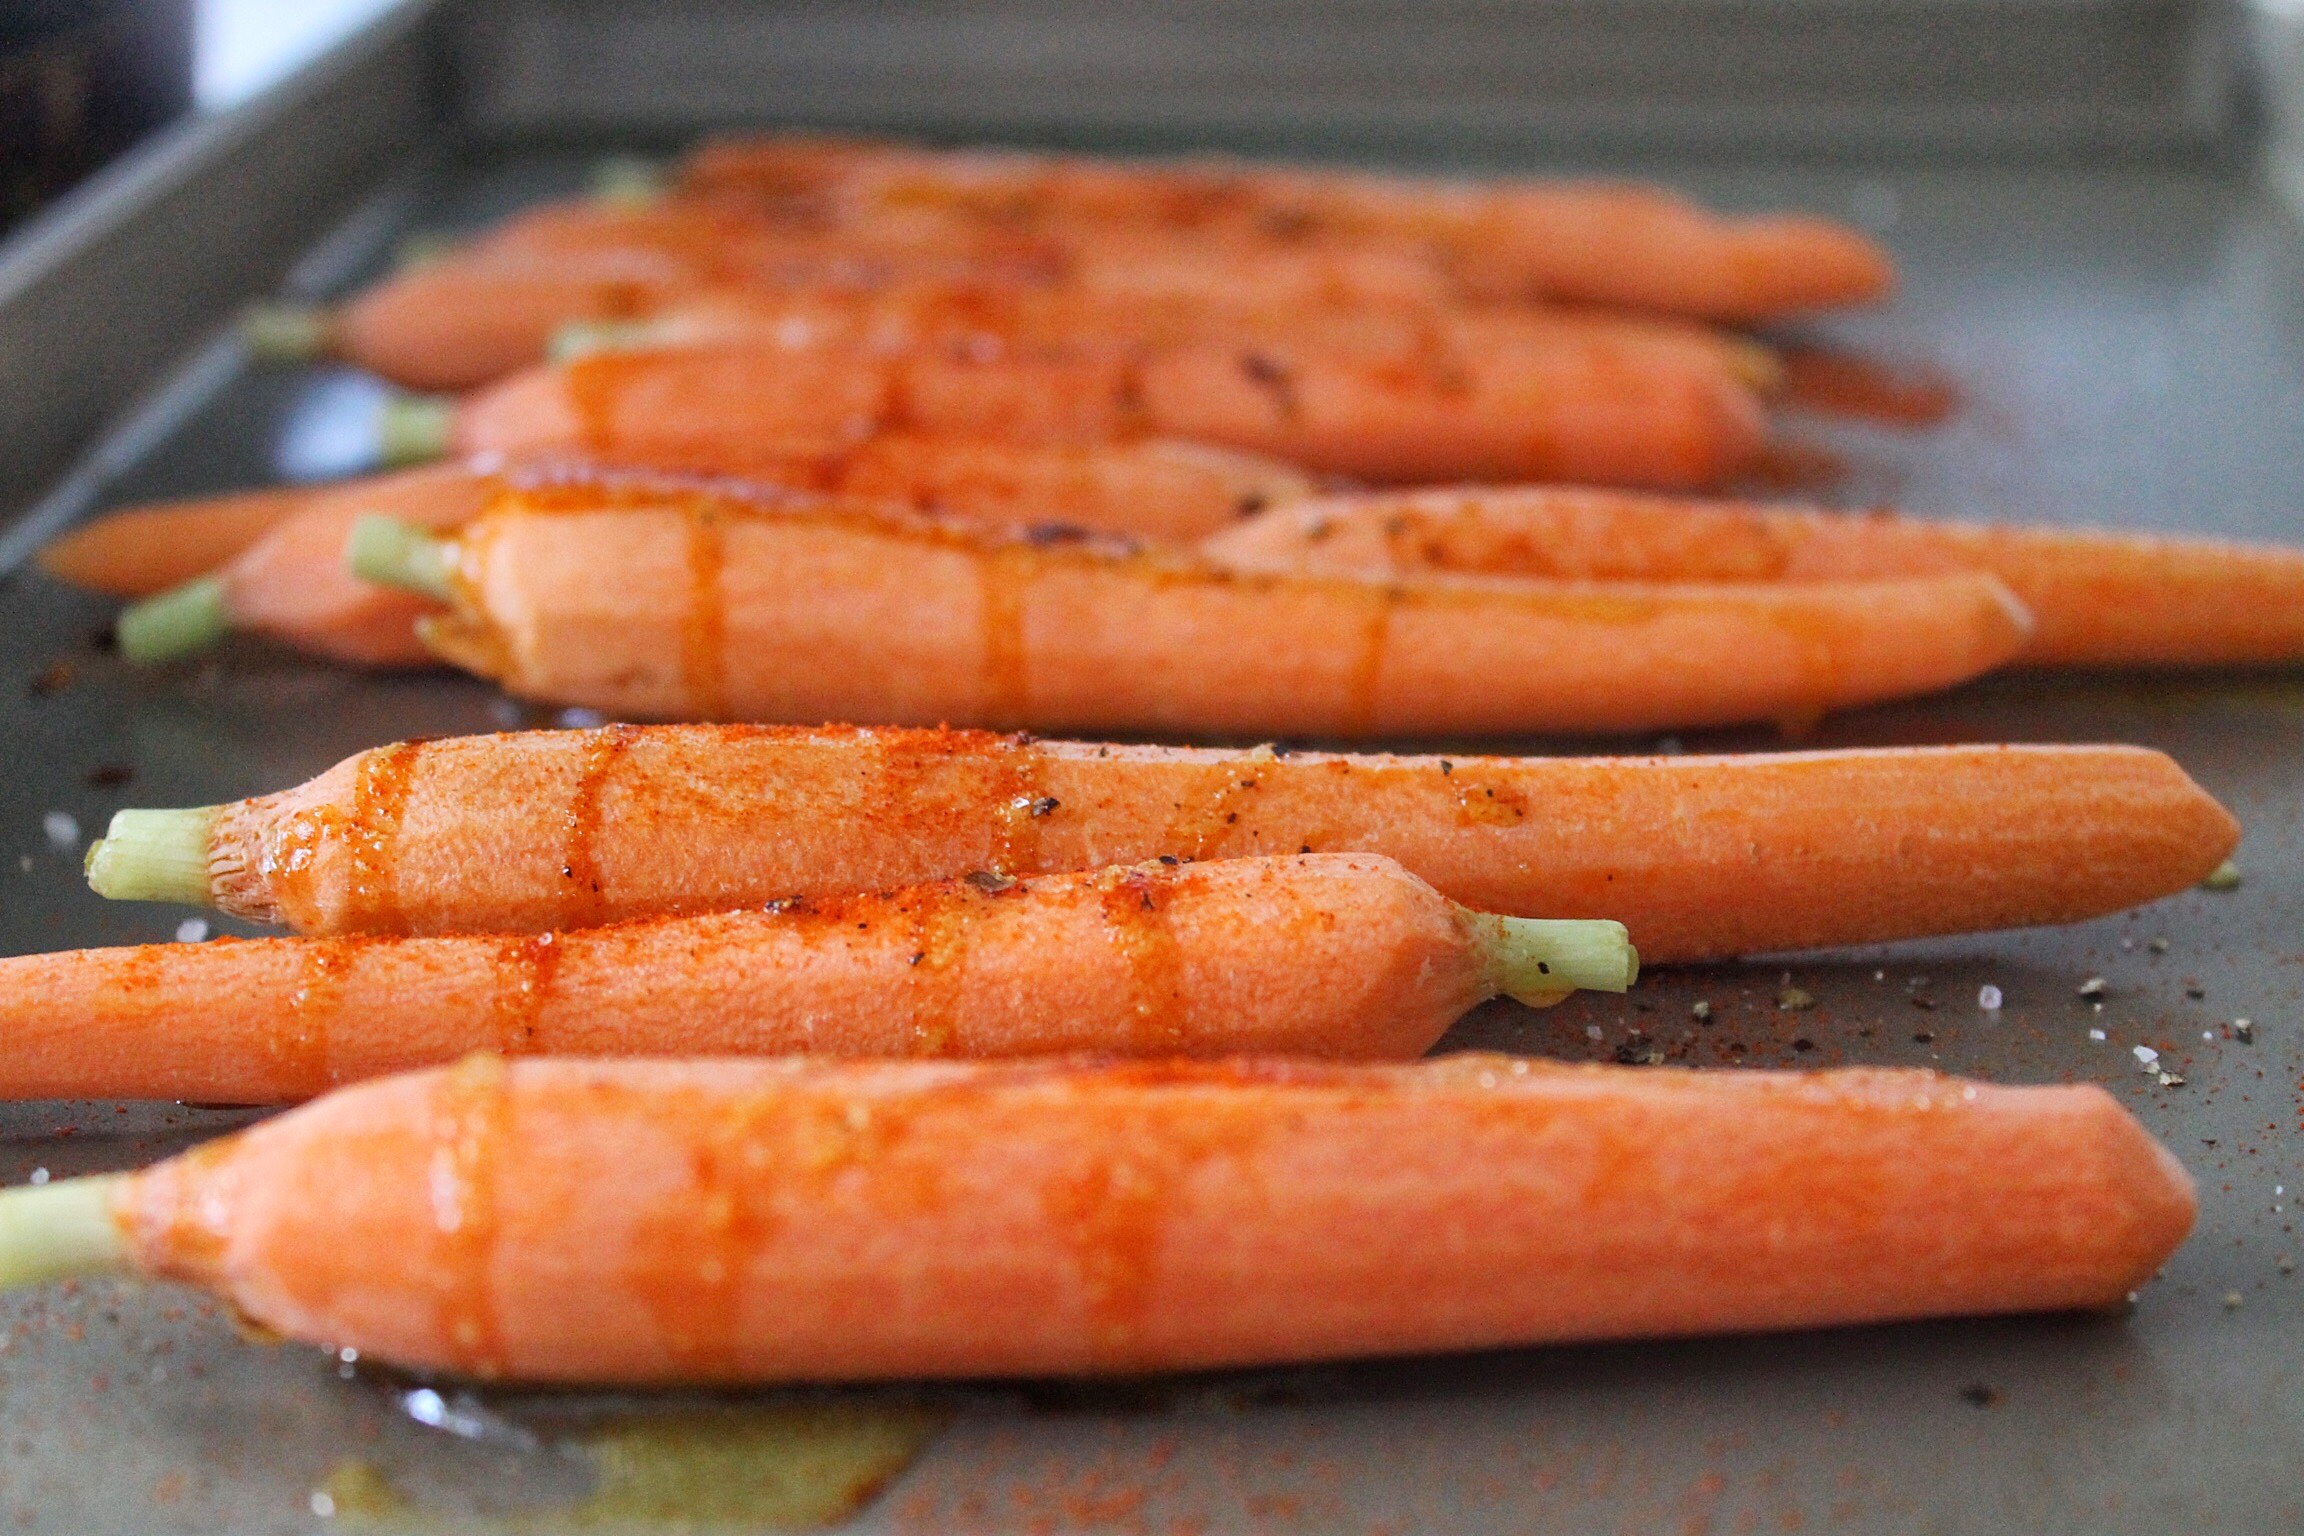 Spiced Roasted Carrots